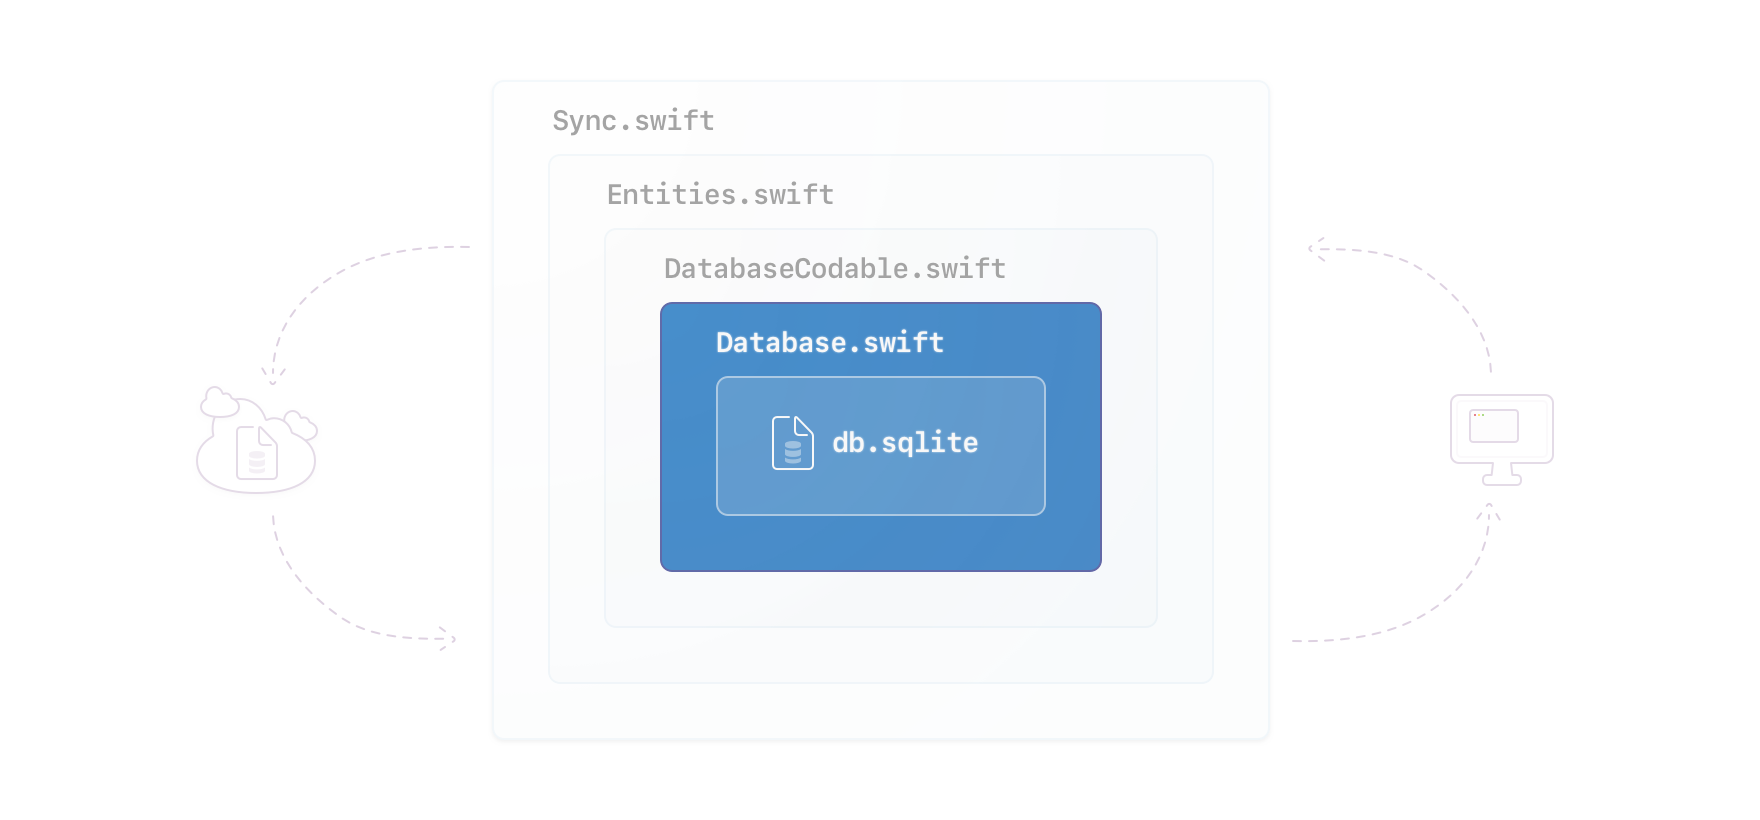 Illustration of a cloud, a computer's desktop with a window visible, and between a nested set of squares representing code concepts (from outside, in) listing Sync.swift, Entities.swift, DatabaseCodable.swift, Database.swift, and db.sqlite representing the local database file on a device with Database.swift and db.sqlite highlighted